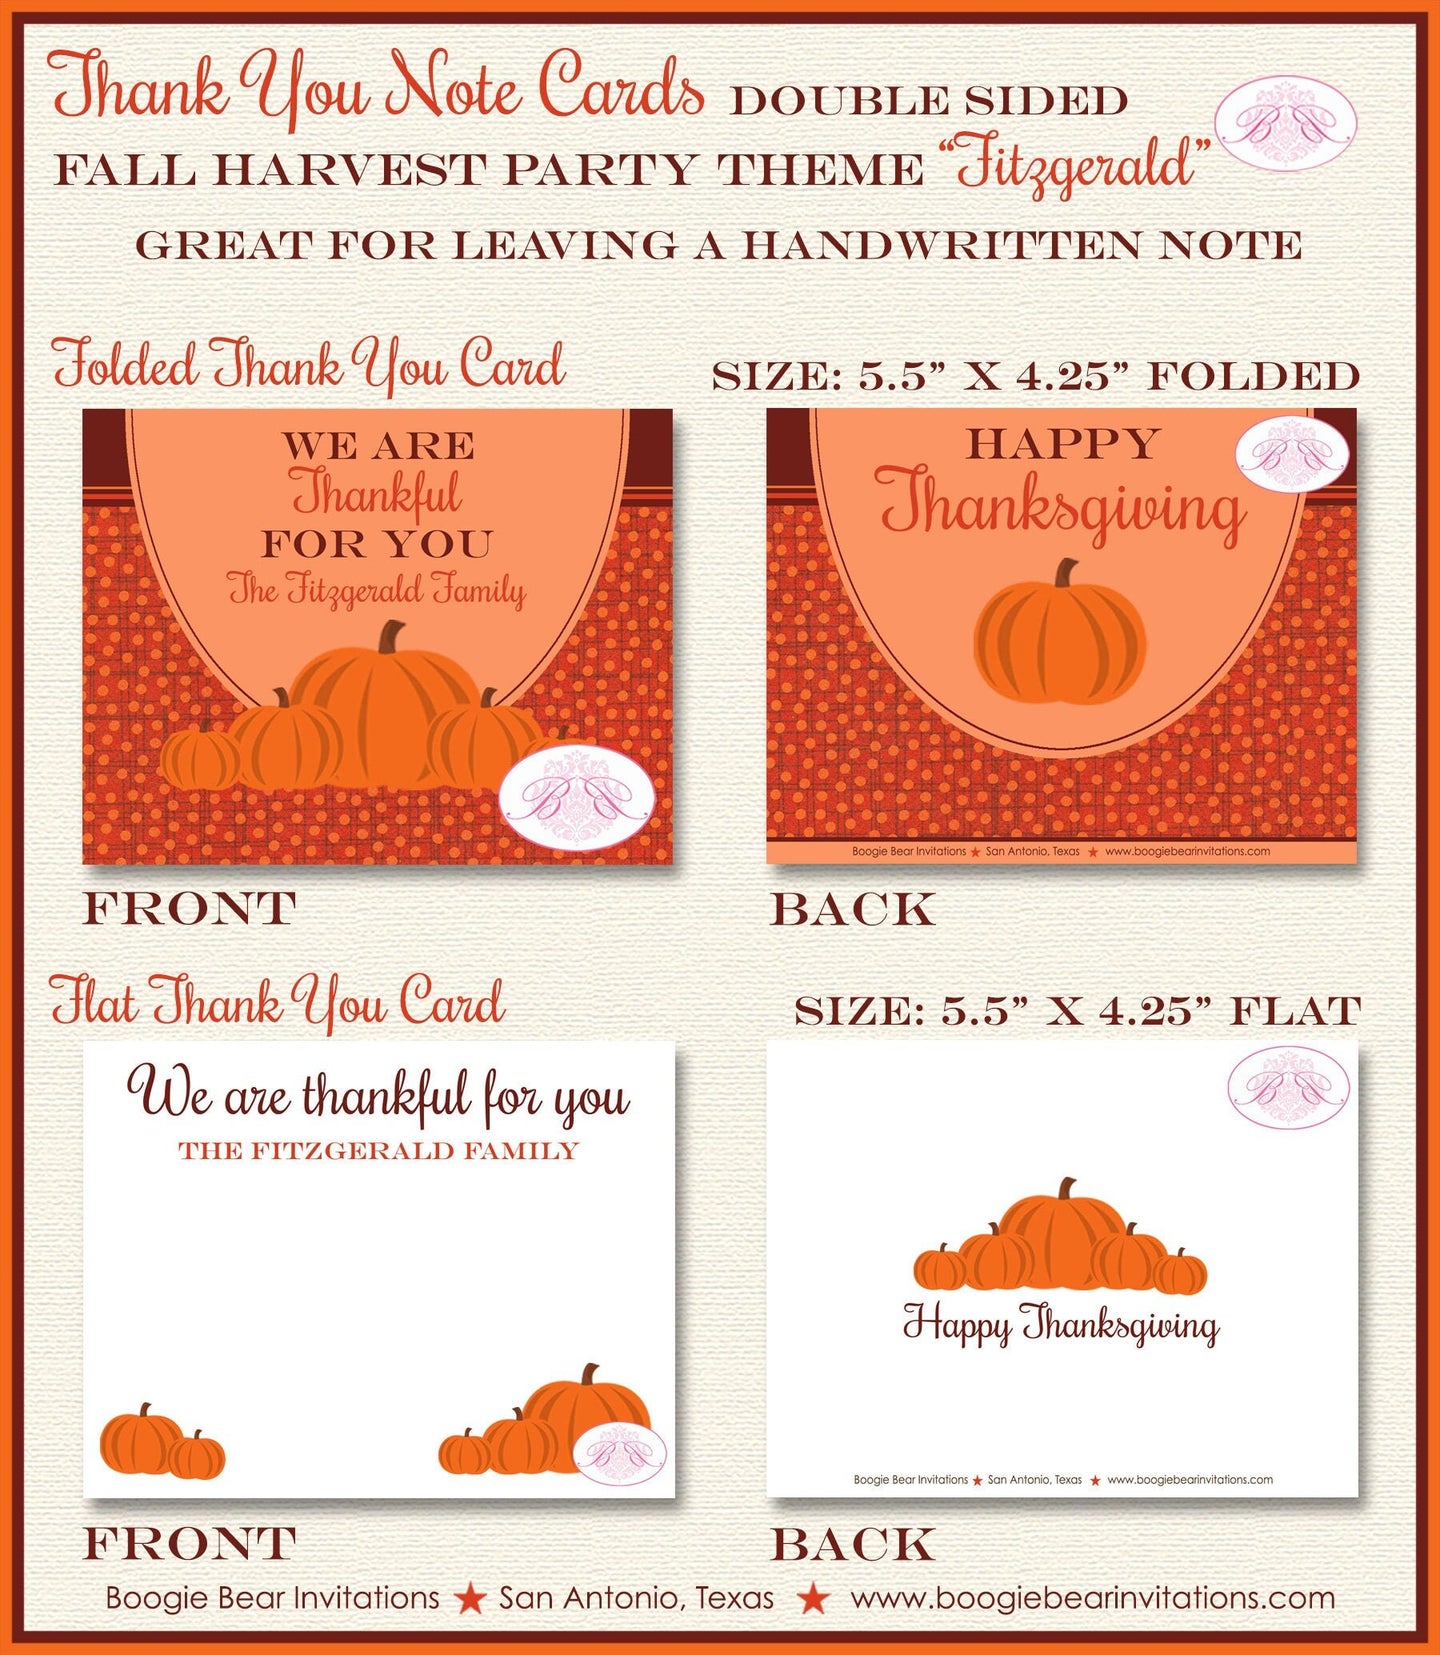 Fall Harvest Thanksgiving Thank You Cards Flat Folded Note Dinner Pumpkin Autumn Orange 1st Boogie Bear Invitations Fitzgerald Theme Printed